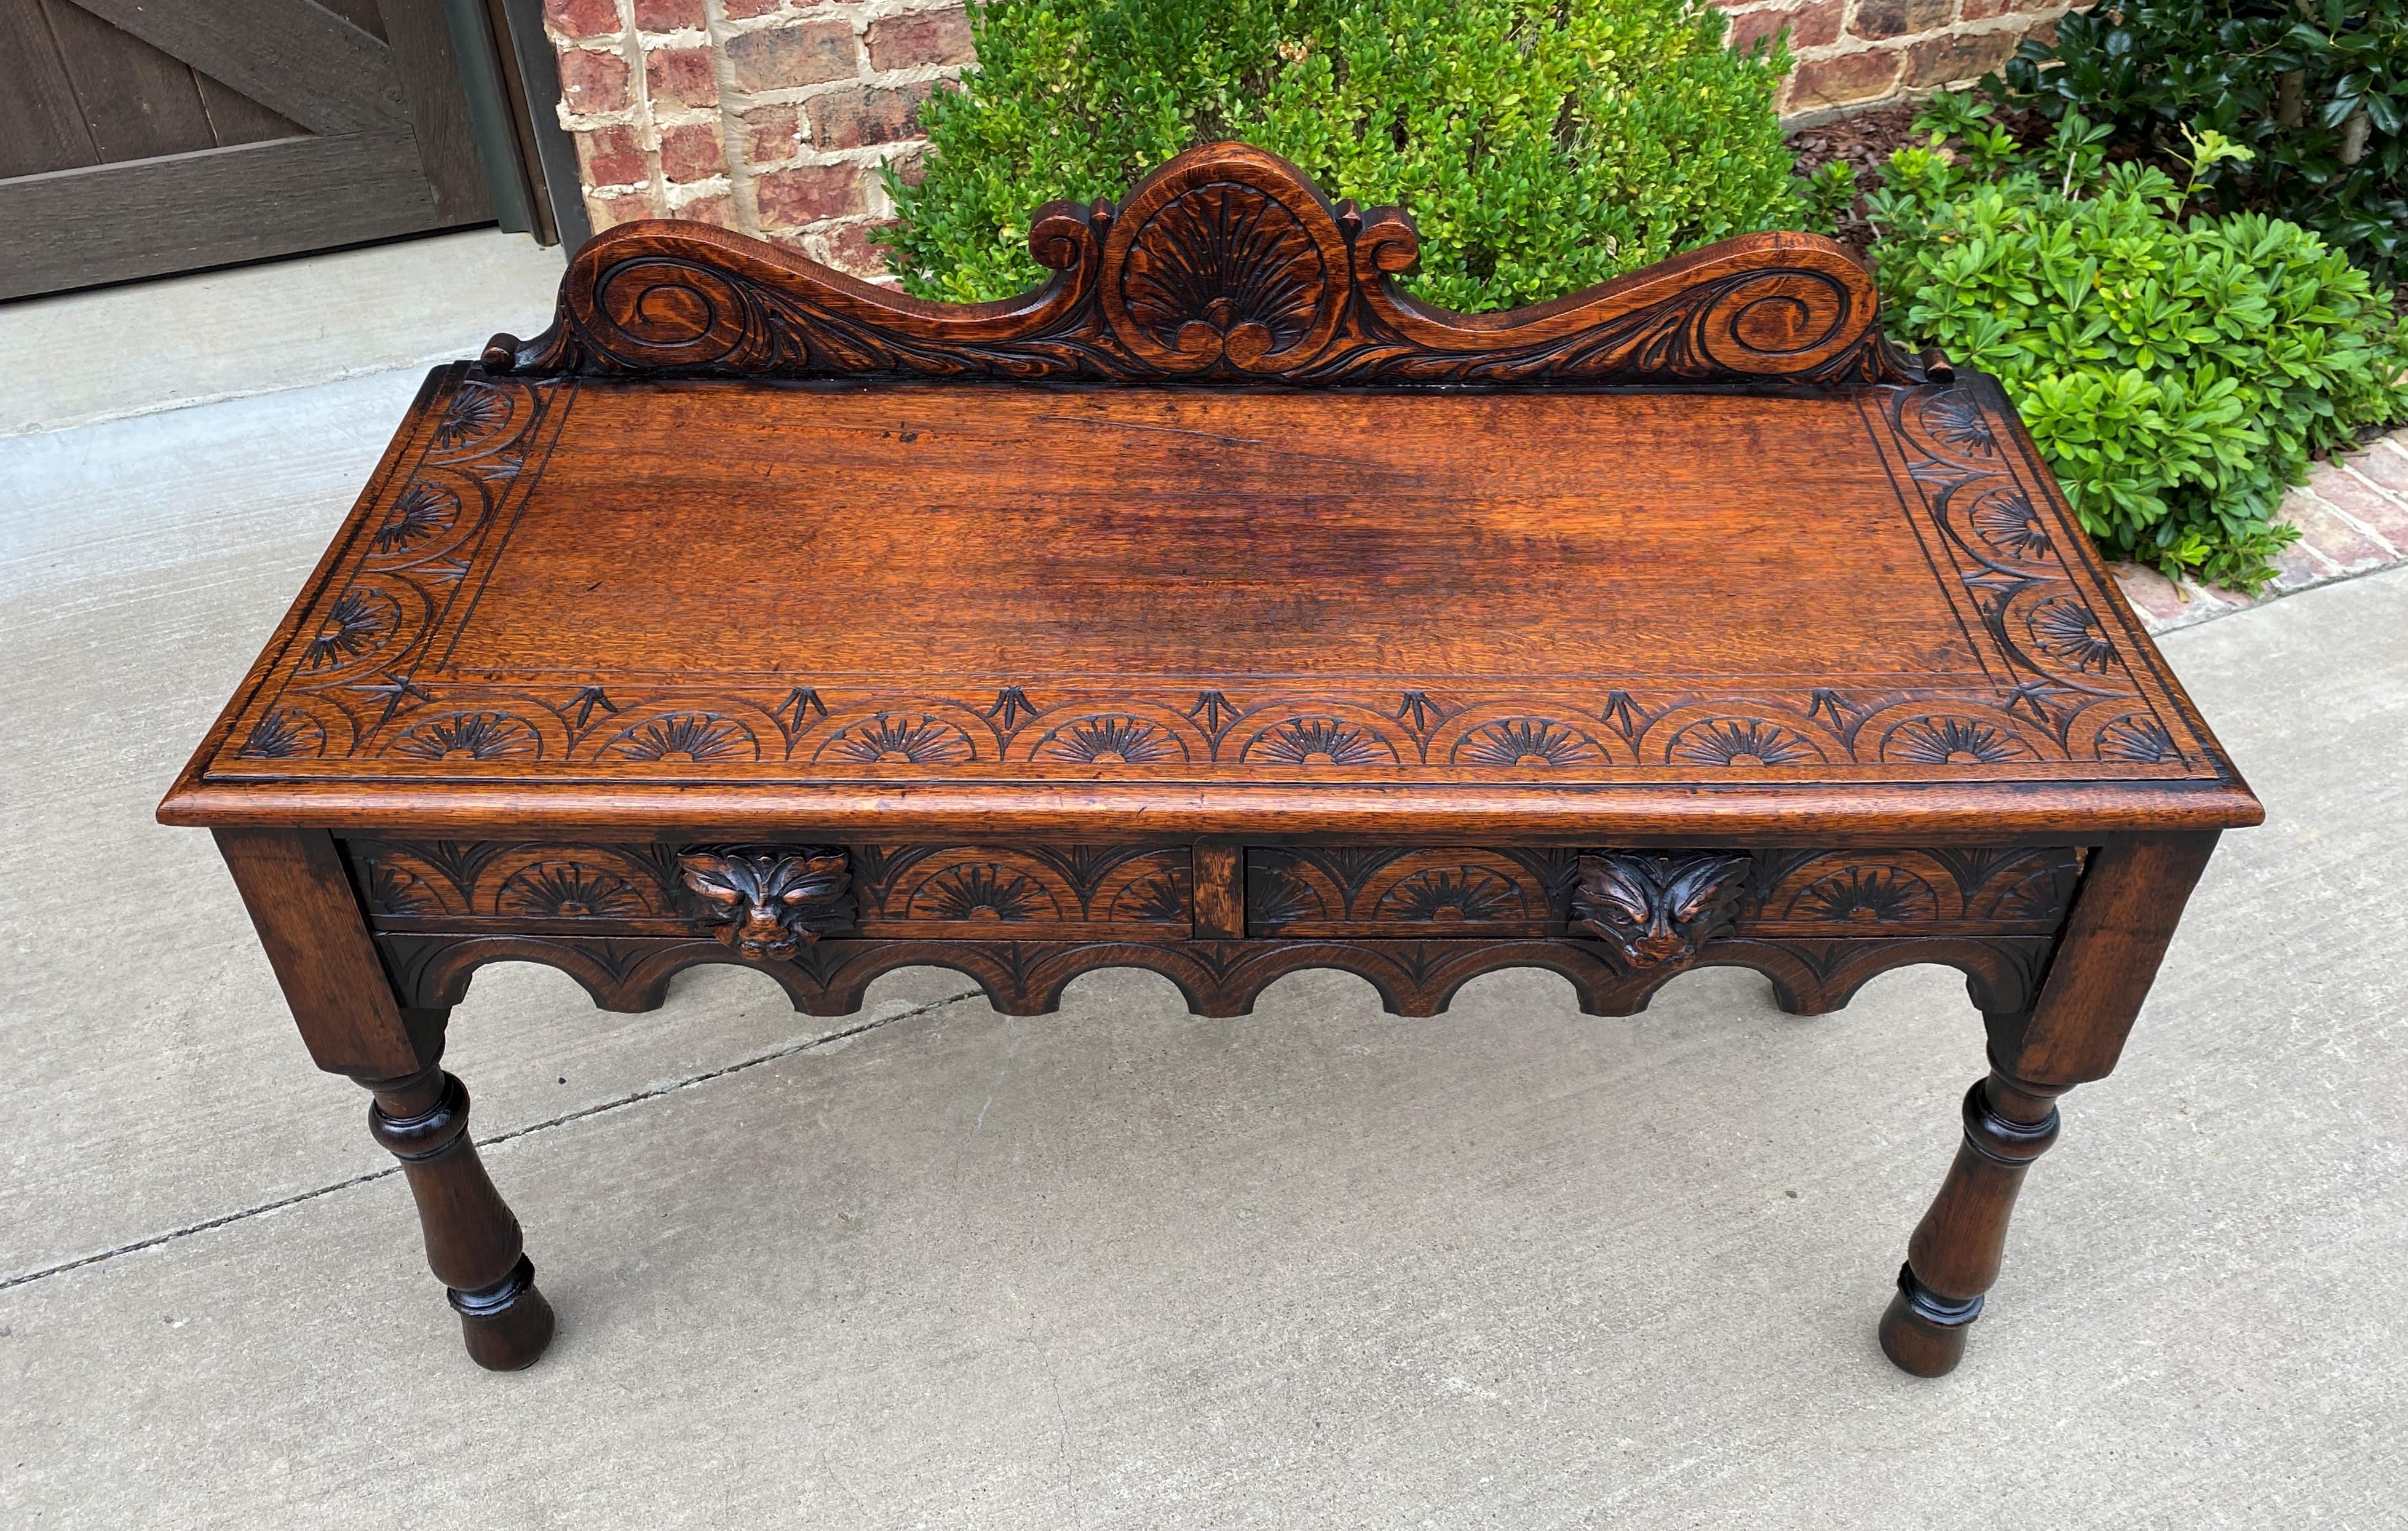 Antique English Window Seat Bed Bench Gothic Revival Carved Oak 2 Drawers c.1900 For Sale 4